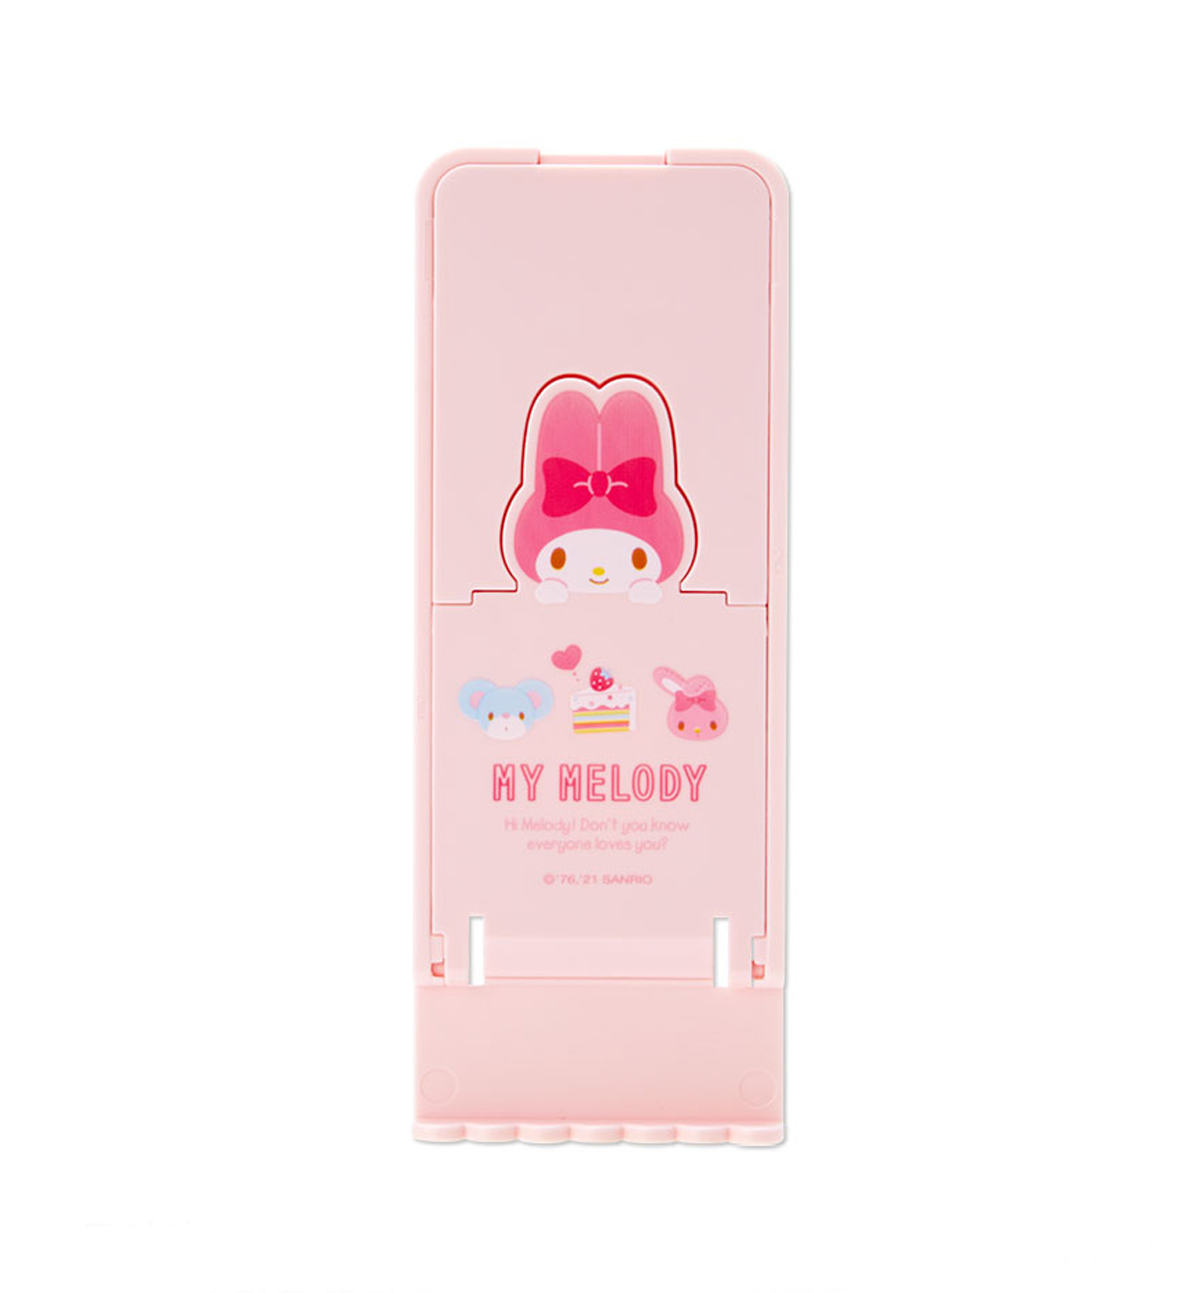 Sanrio Cellphone Stand Holder [My Melody]